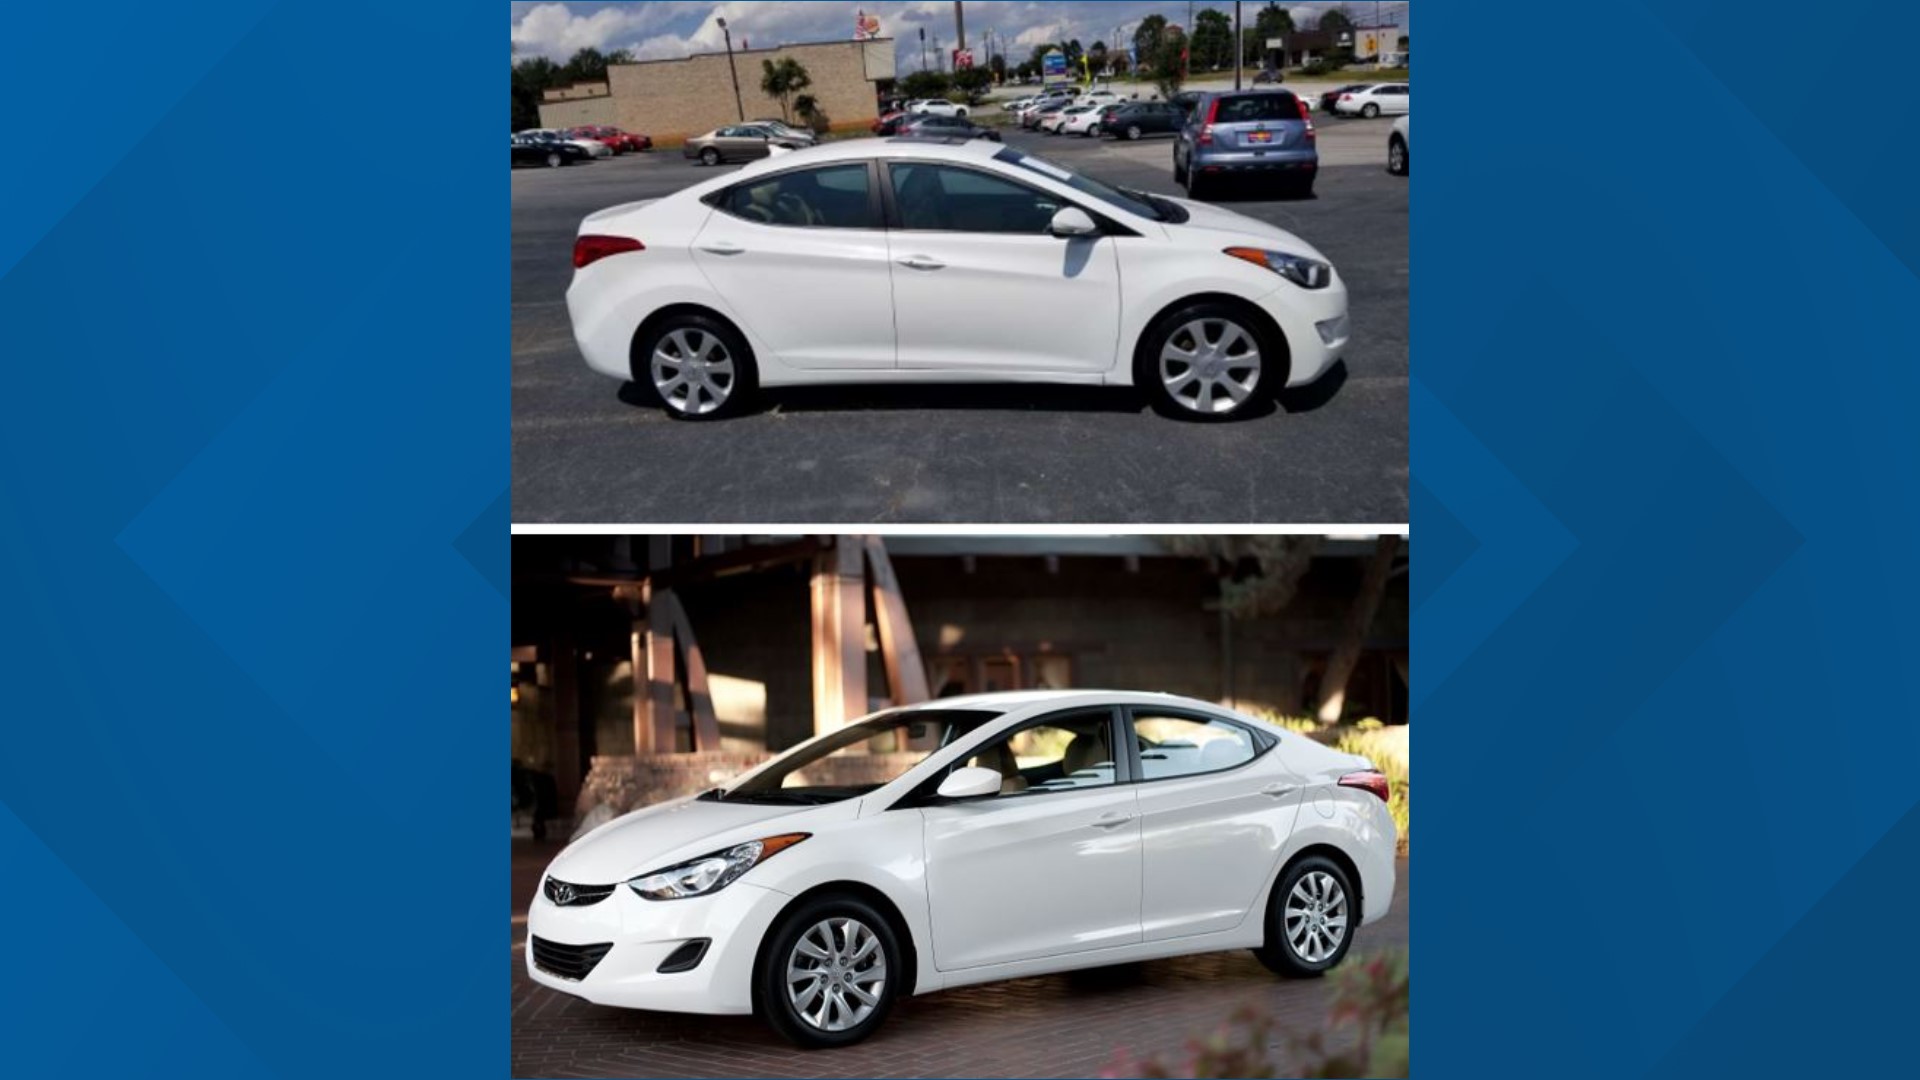 Moscow PD searching for white Hyundai Elantra in relation to U of I murder case